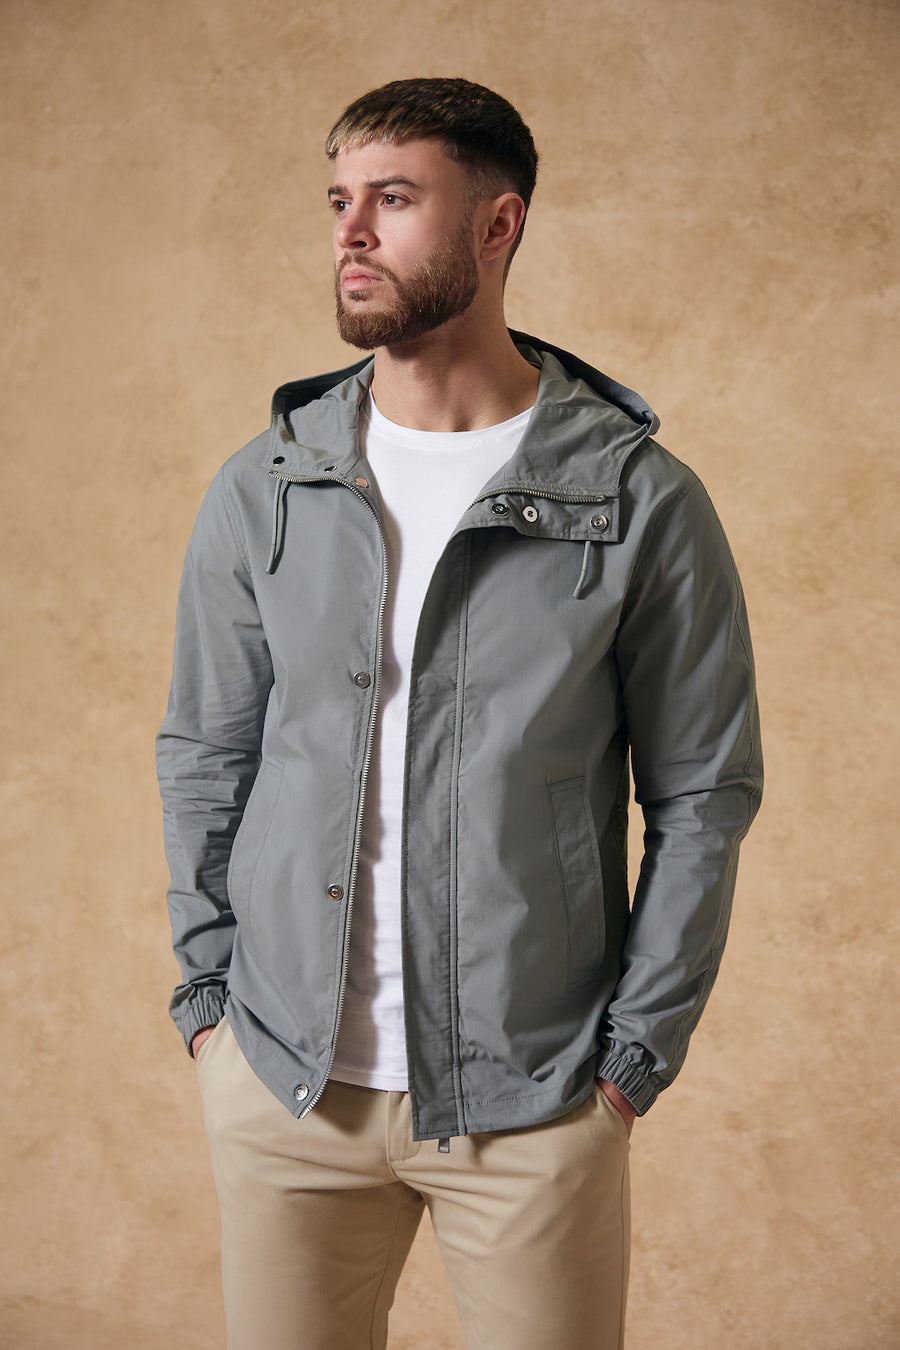 Storm Jacket in Sage - TAILORED ATHLETE - USA